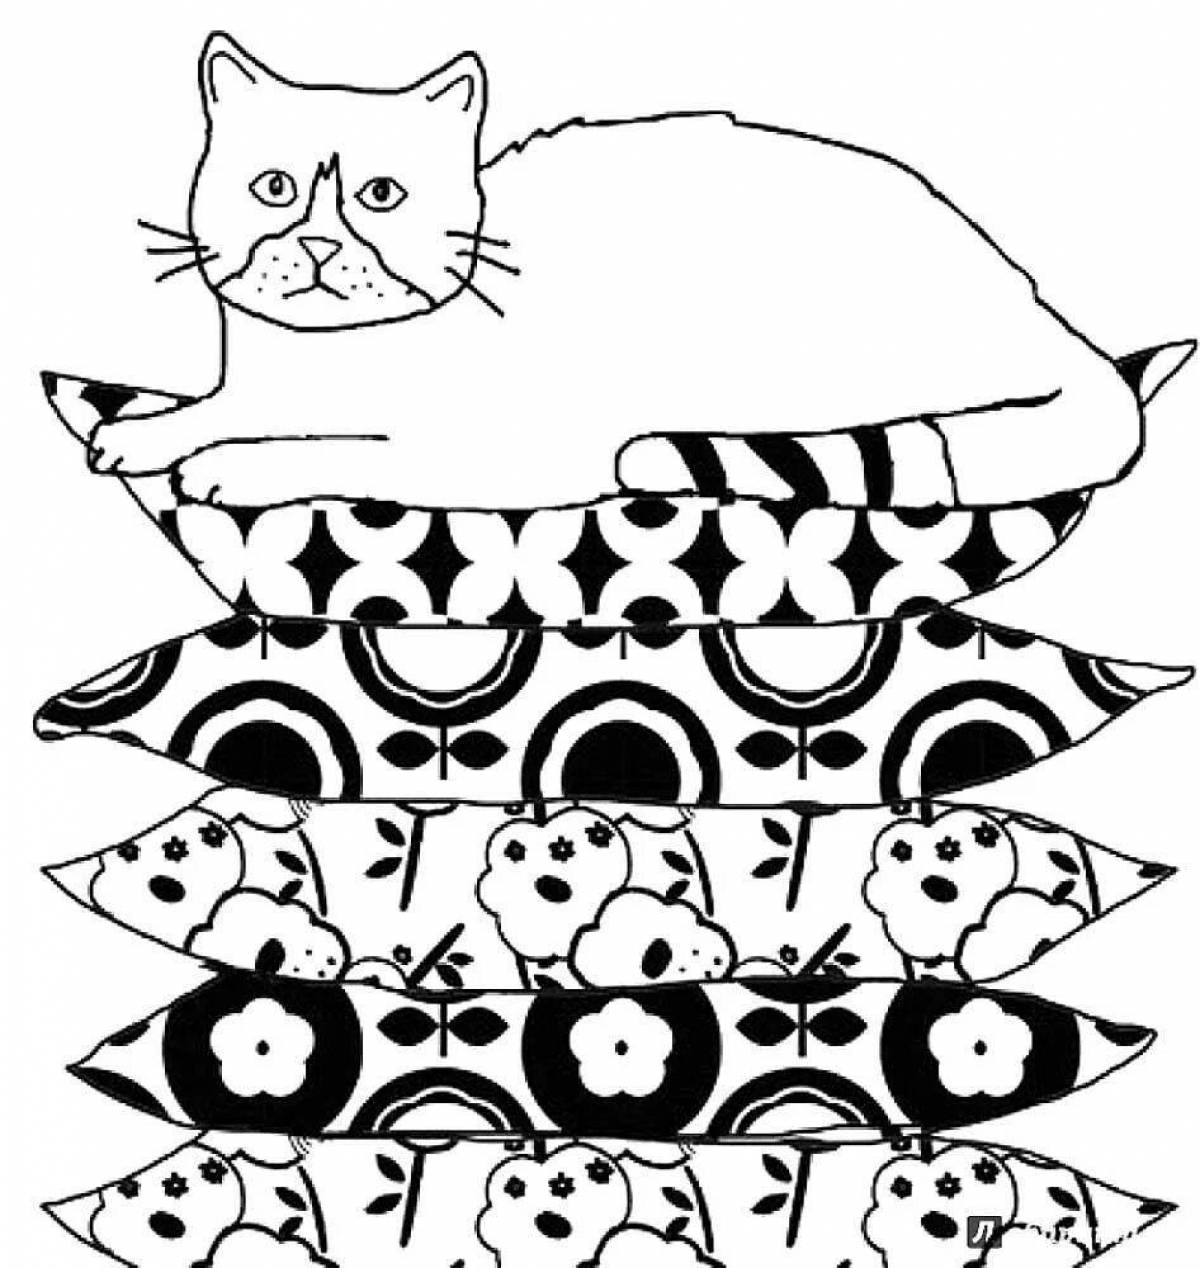 Glorious cat therapy anti-stress coloring book